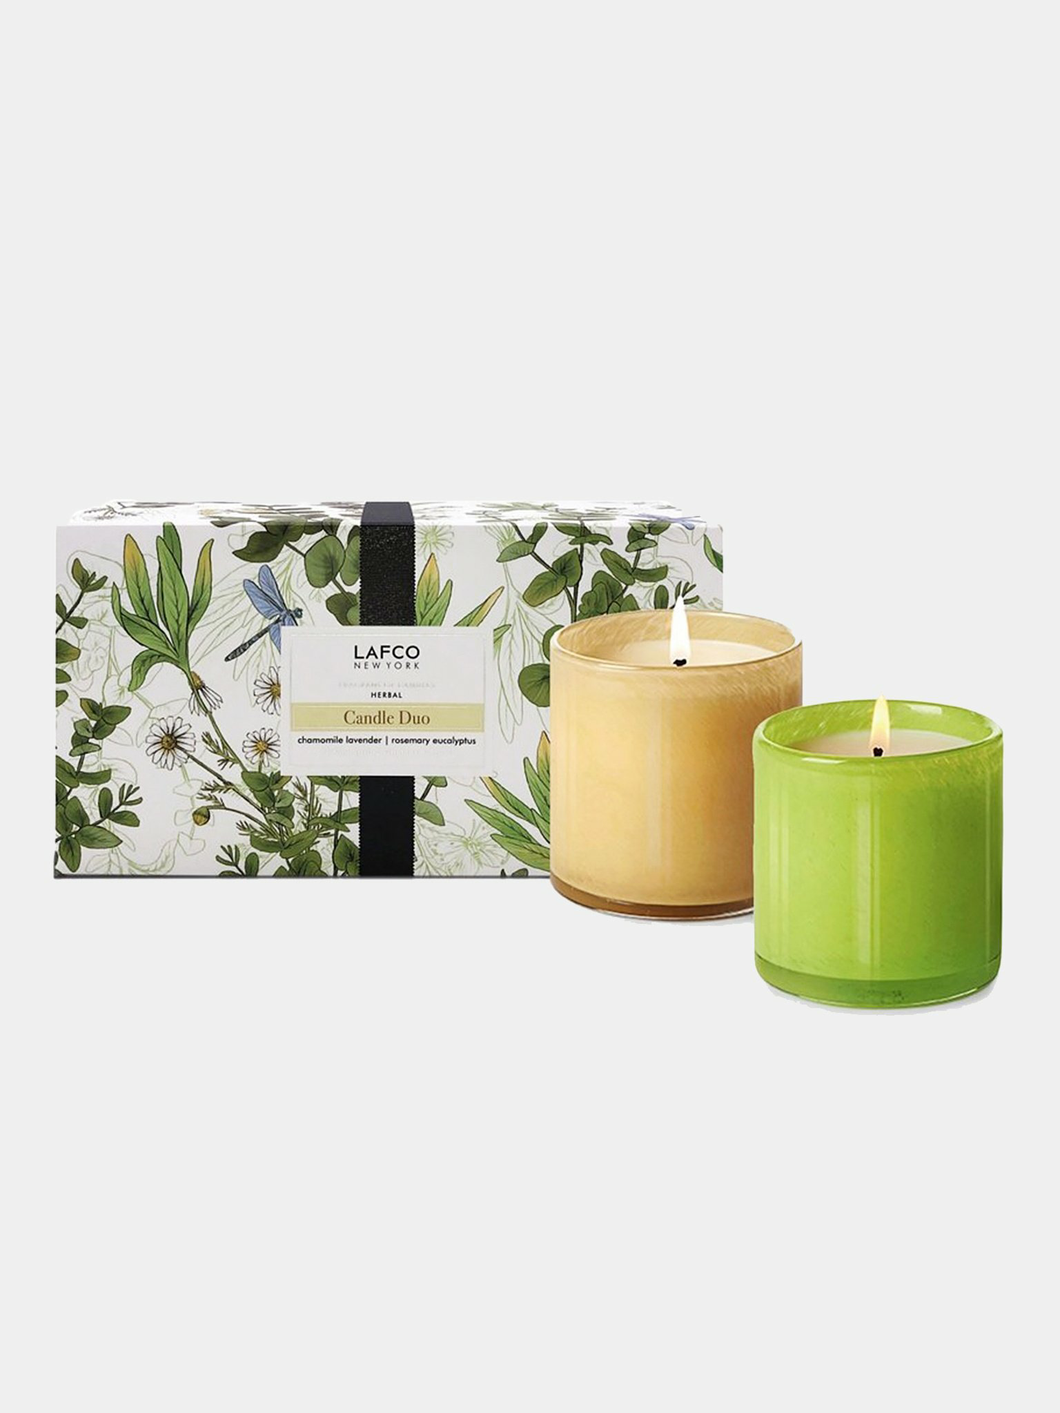 6.5oz Limited Edition Herbal Candle Duo - Chamomile Lavender & Rosemary Eucalyptus